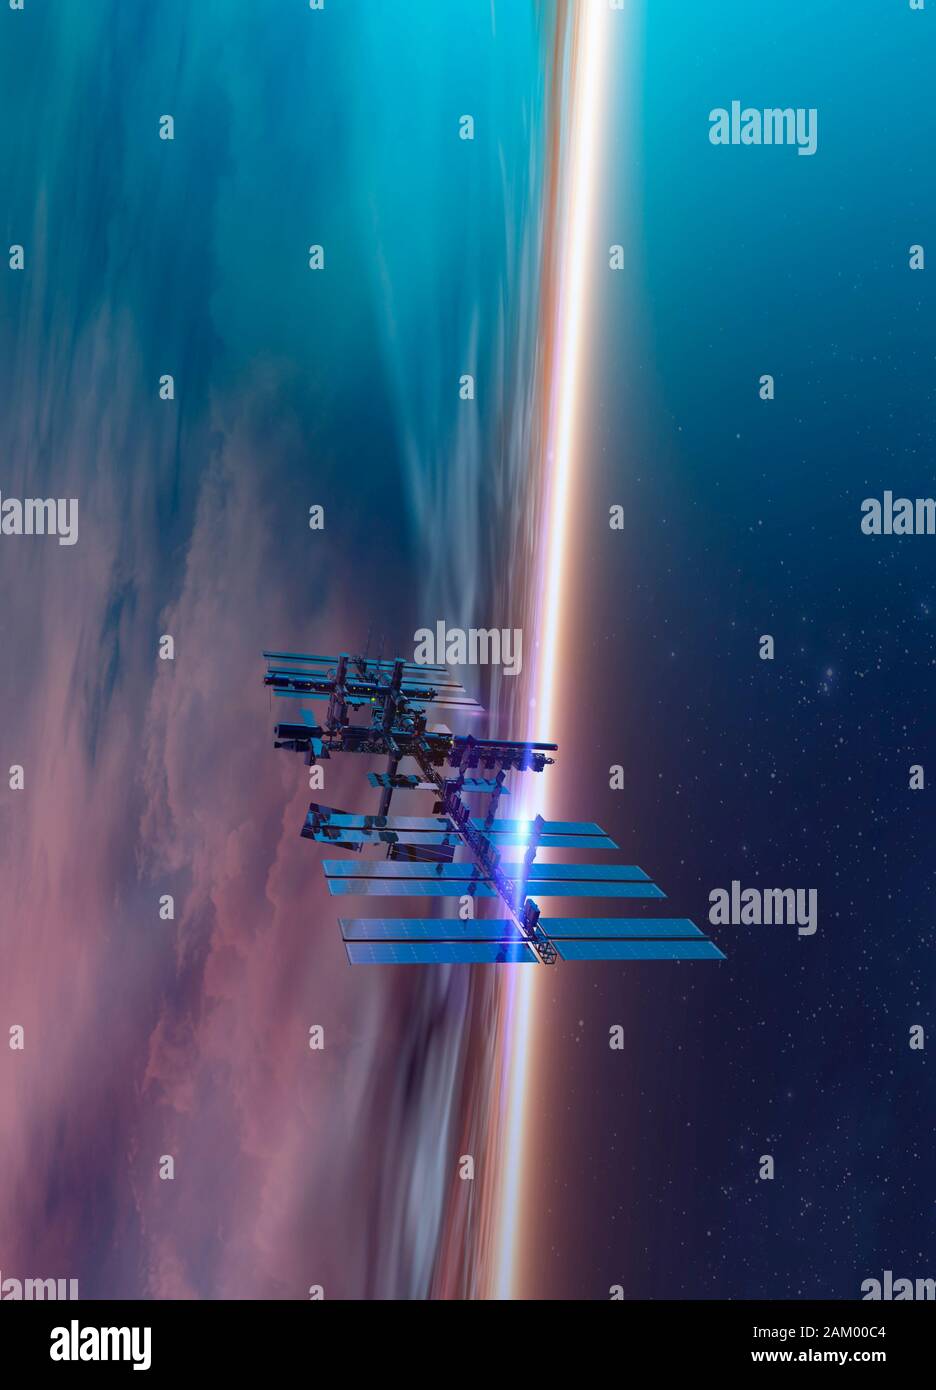 Space station above earth, illustration Stock Photo